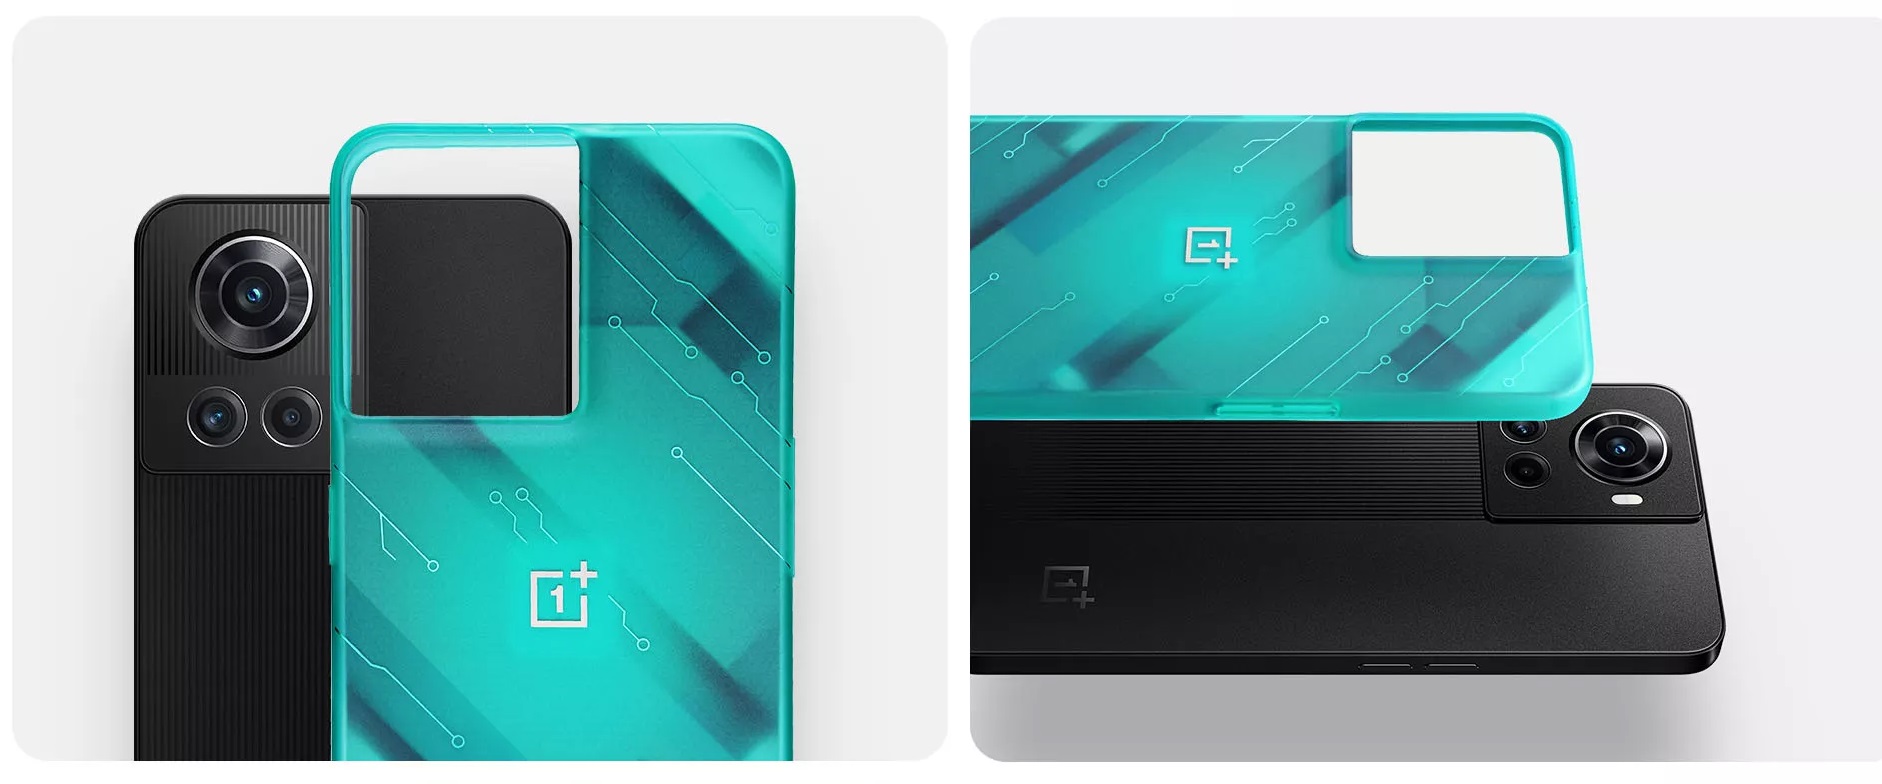 OnePlus ACE Lightning Cyan Bumper Protective  Case